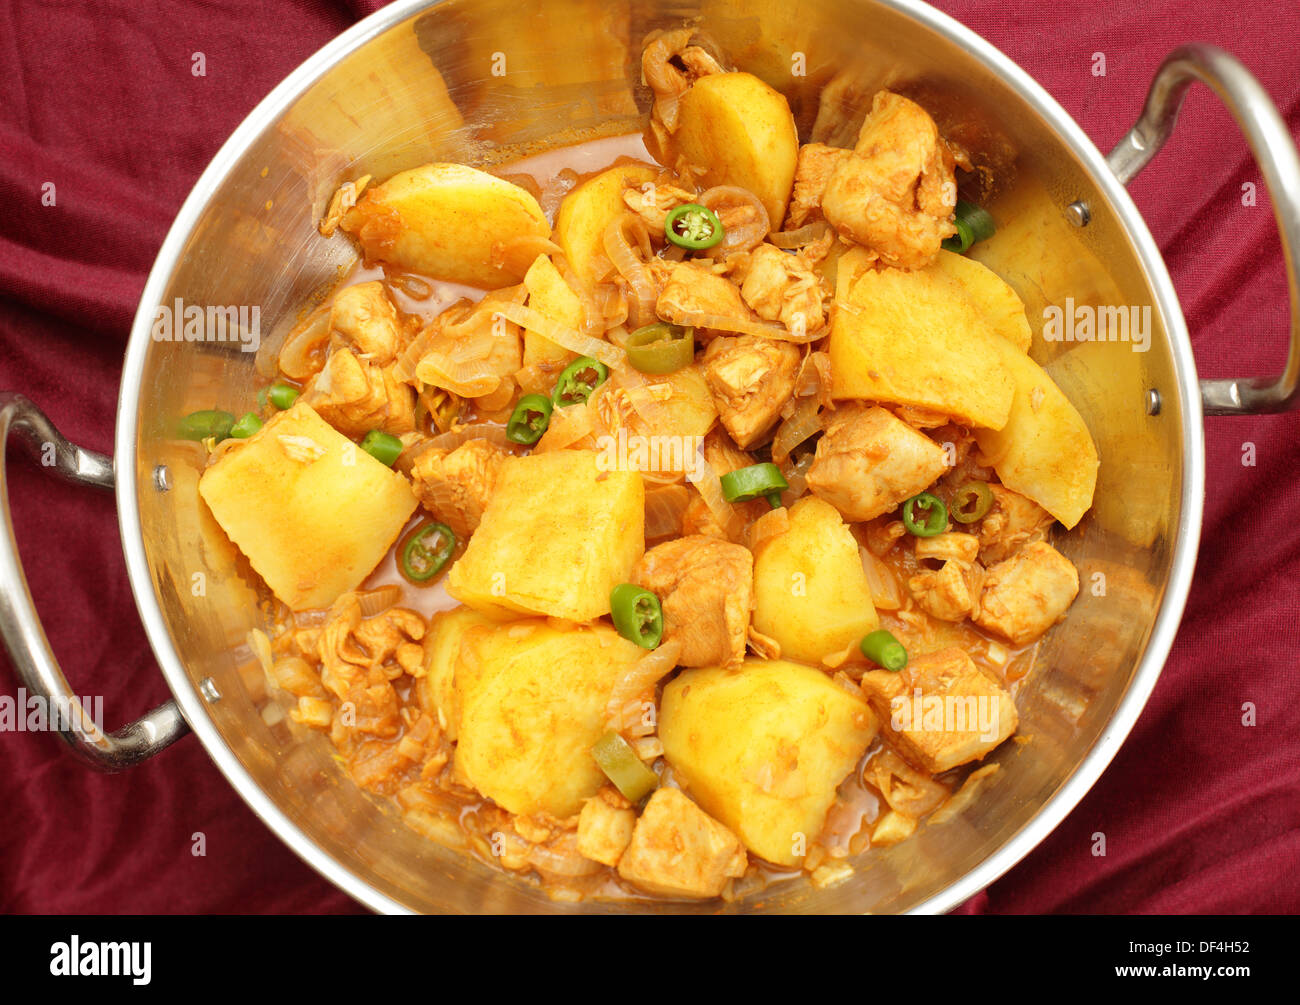 https://c8.alamy.com/comp/DF4H52/a-vindaloo-chicken-and-potato-curry-cooked-balti-style-in-a-kadai-DF4H52.jpg